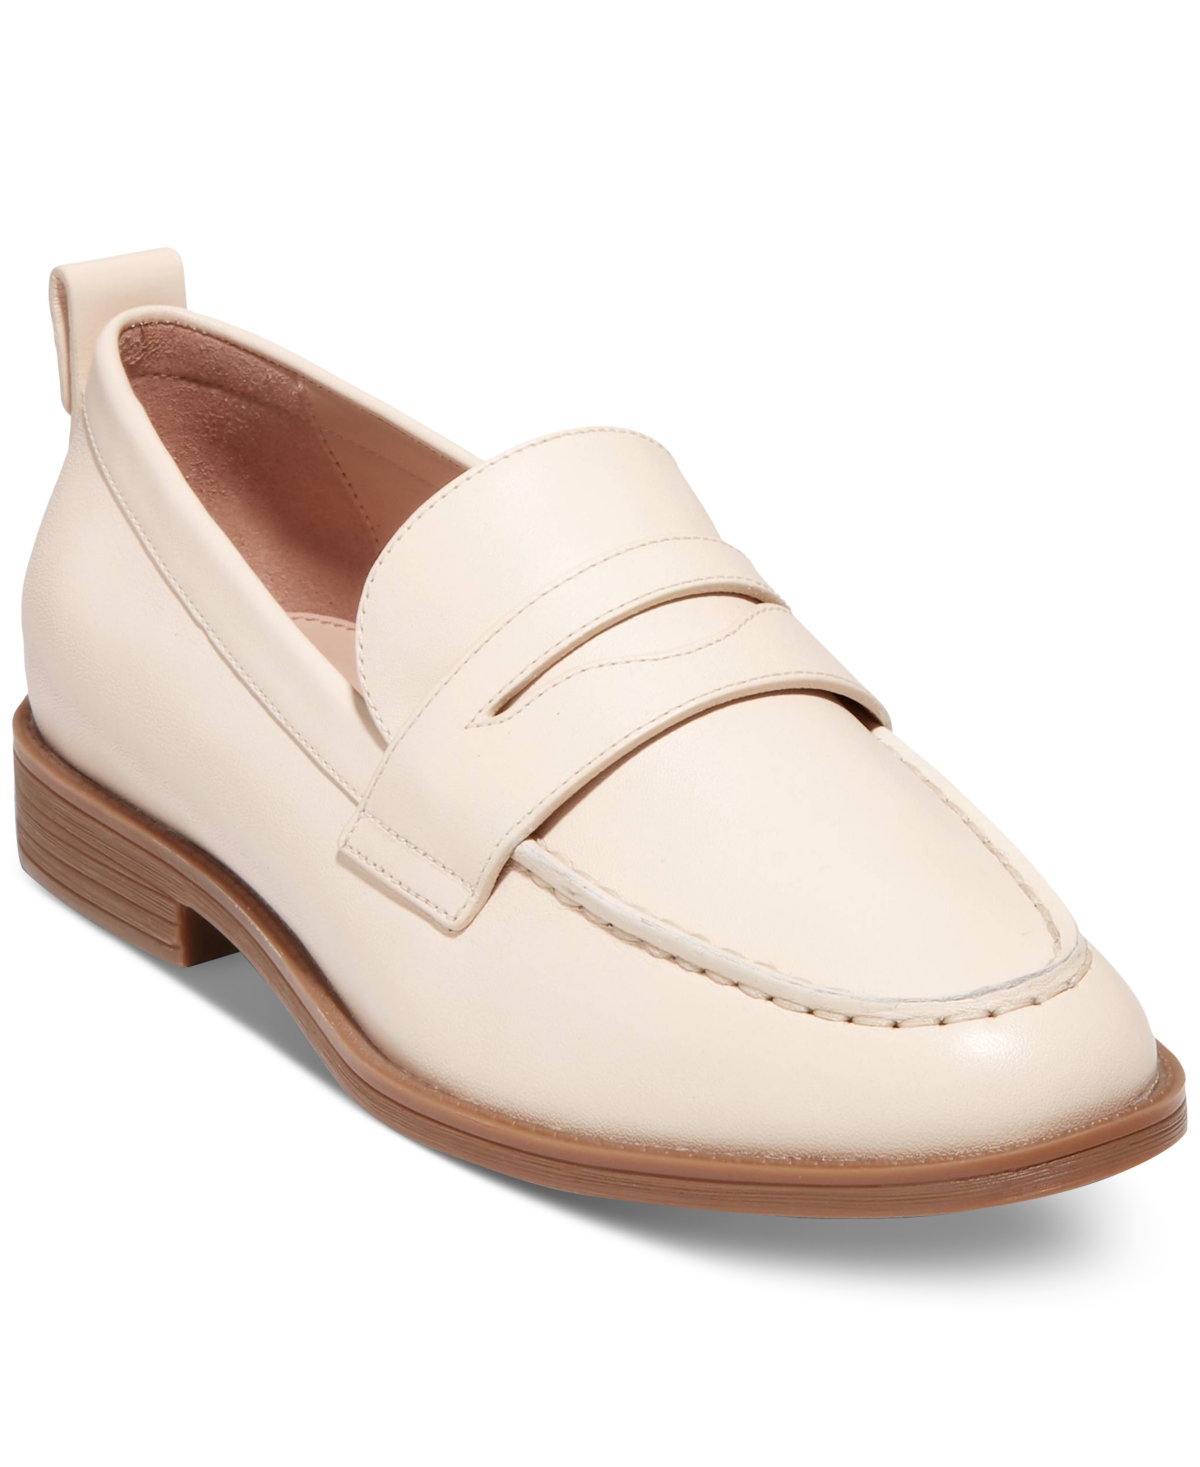 COLE HAAN WOMEN'S STASSI PENNY LOAFER FLATS